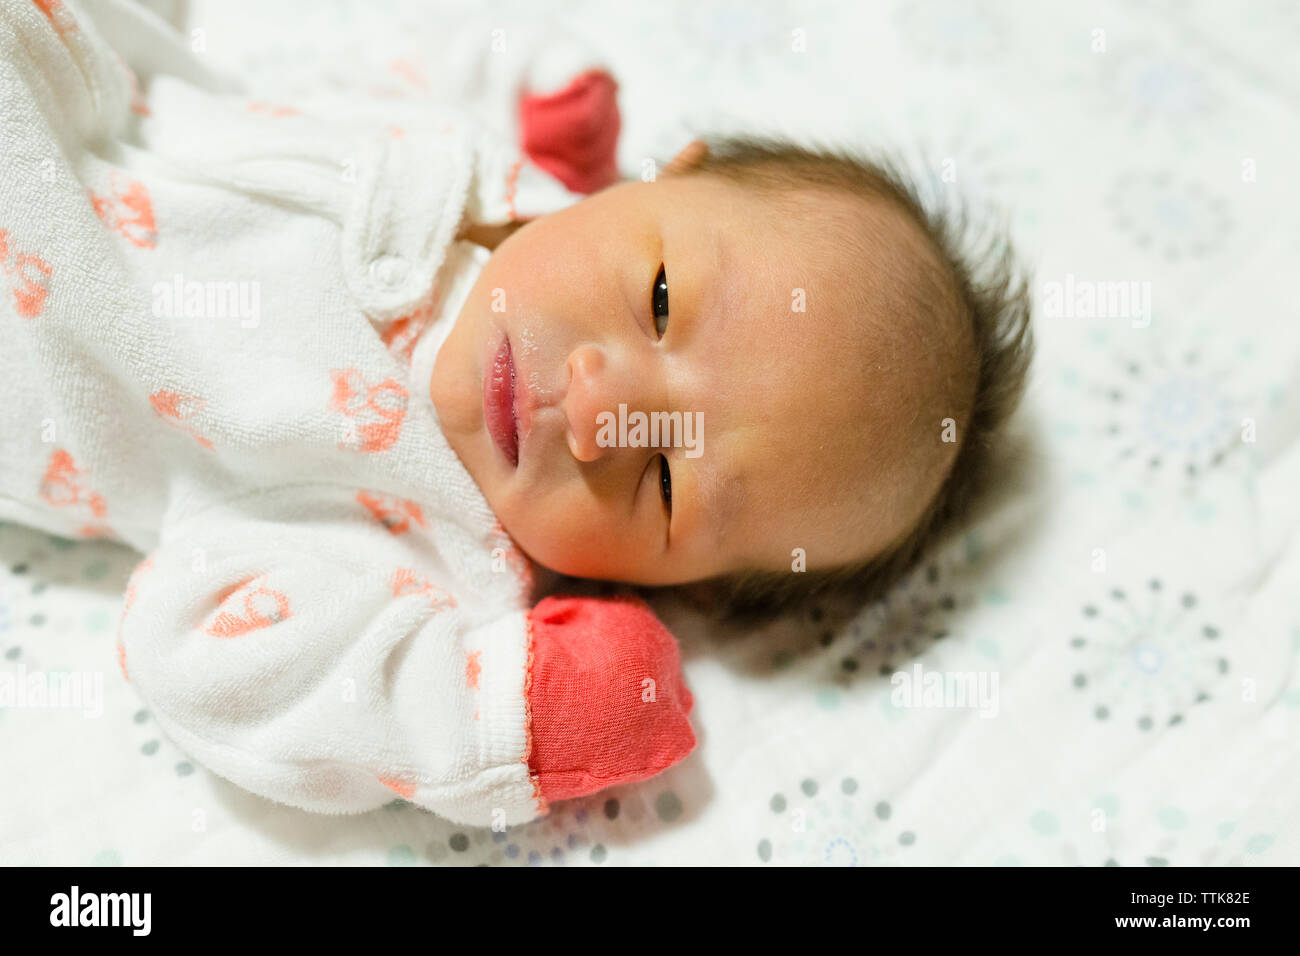 Newborn baby girl lying on blanket with eyes open wearing gloves Stock Photo